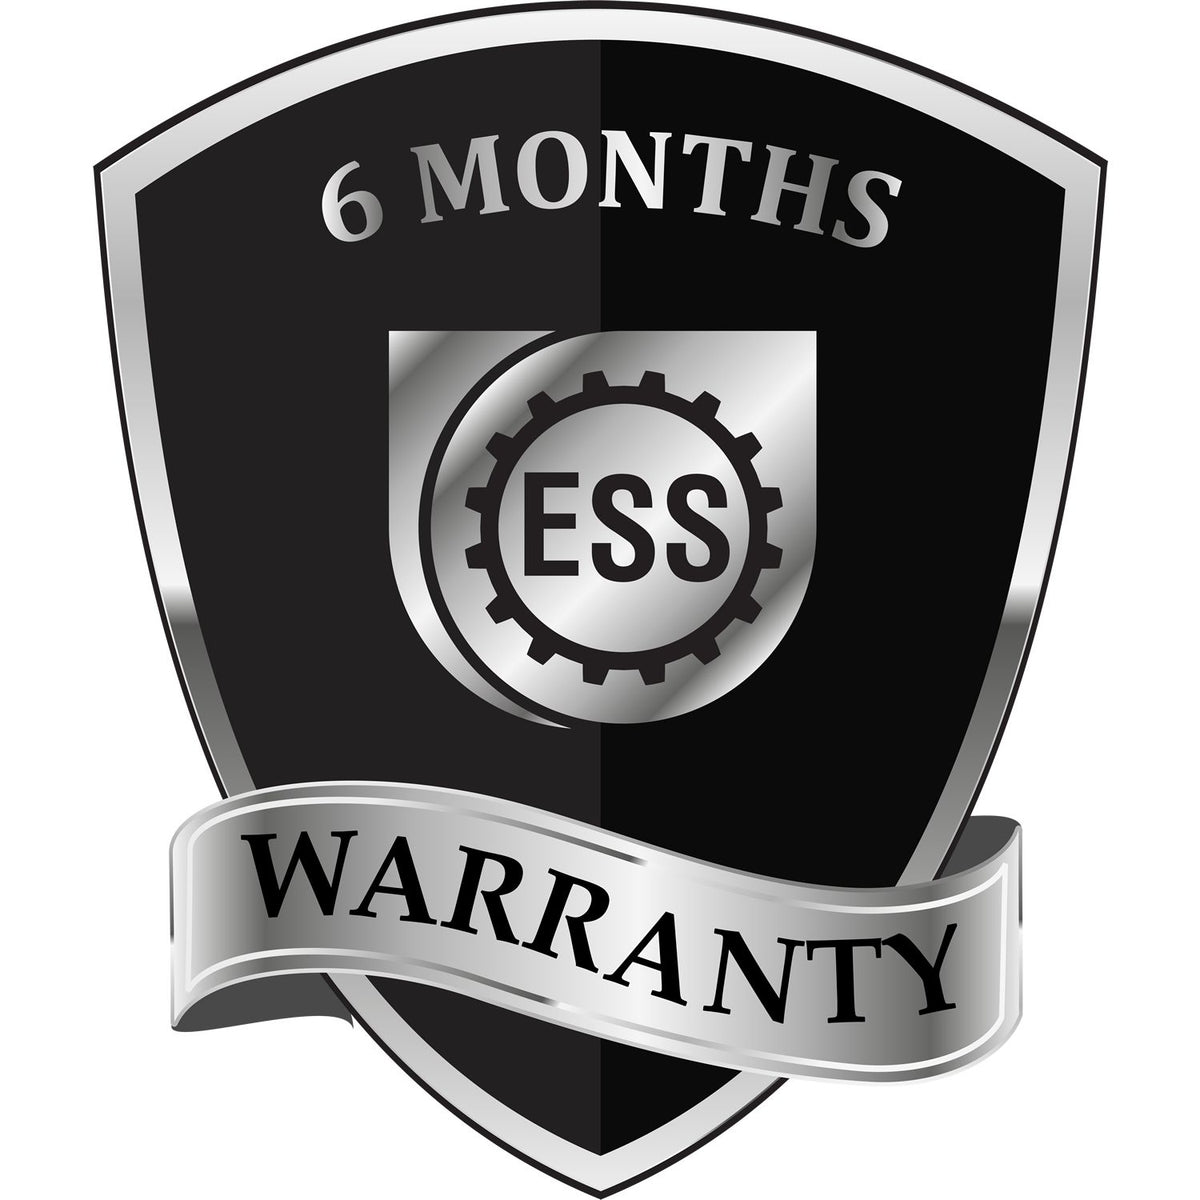 A badge or emblem showing a warranty icon for the Slim Pre-Inked Oklahoma Professional Engineer Seal Stamp